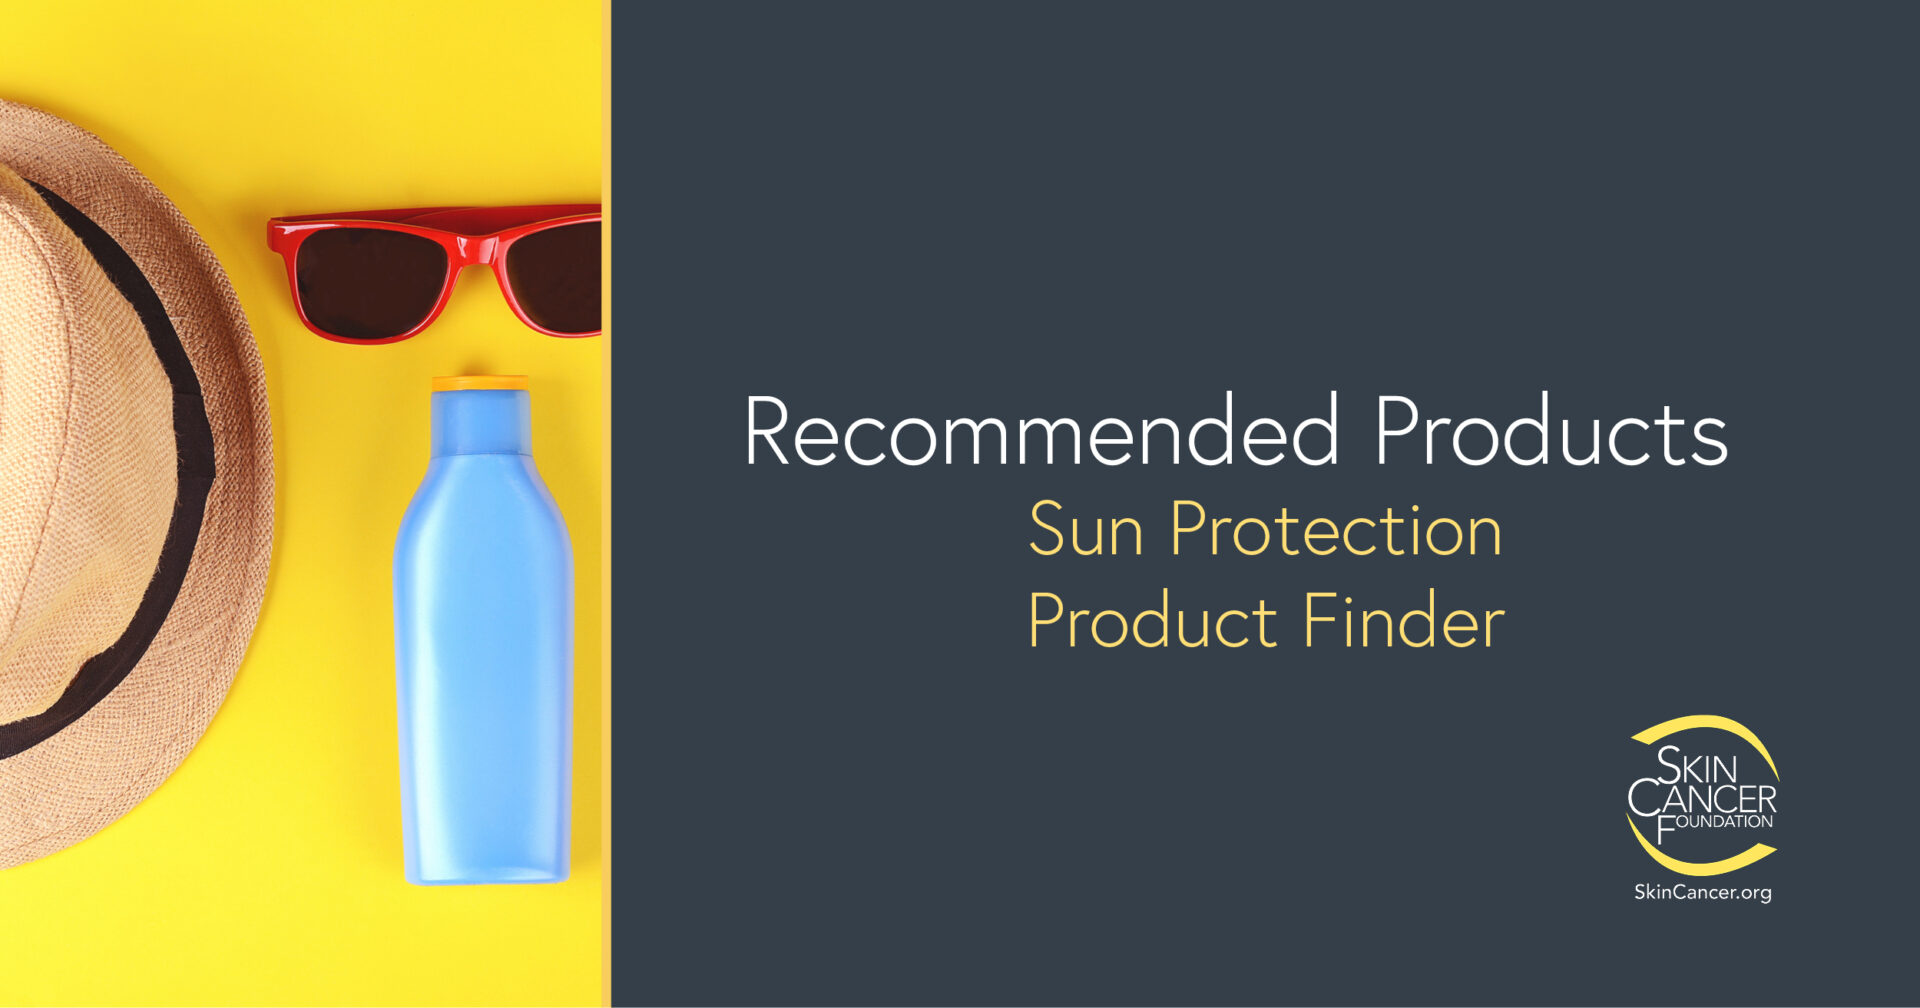 Recommended Products - The Skin Cancer Foundation